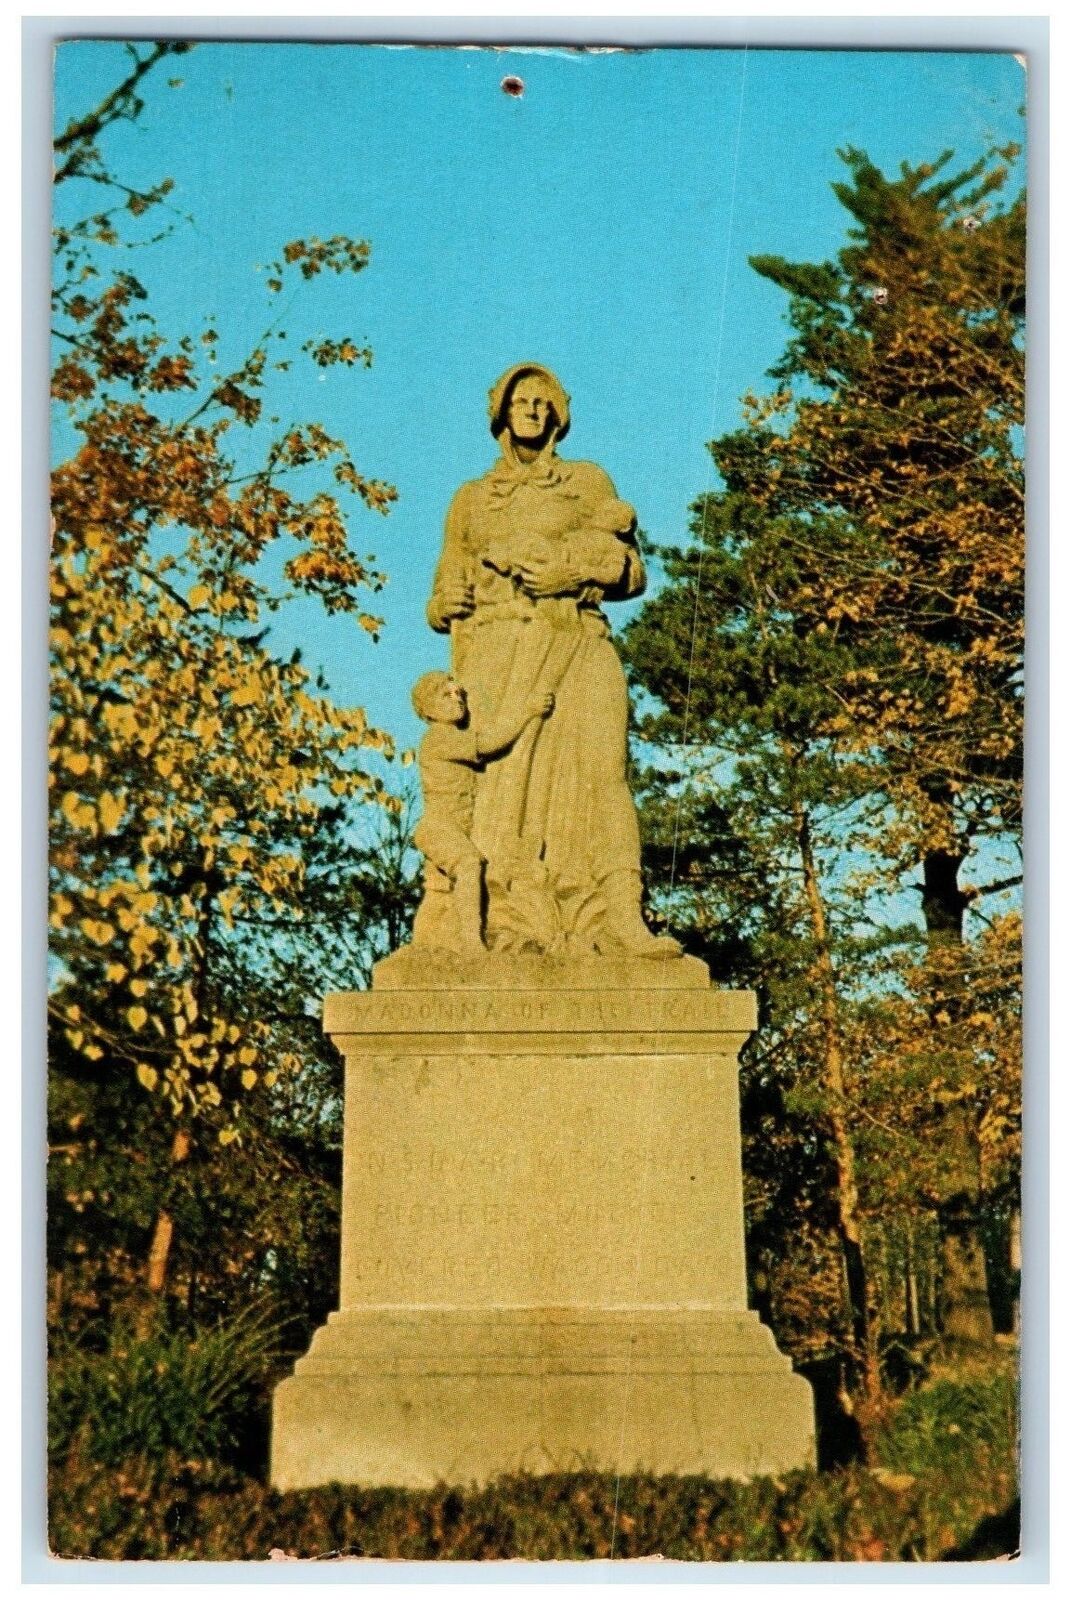 1973 The Madonna Of The Trail Monument Statue Richmond Indiana IN Postcard